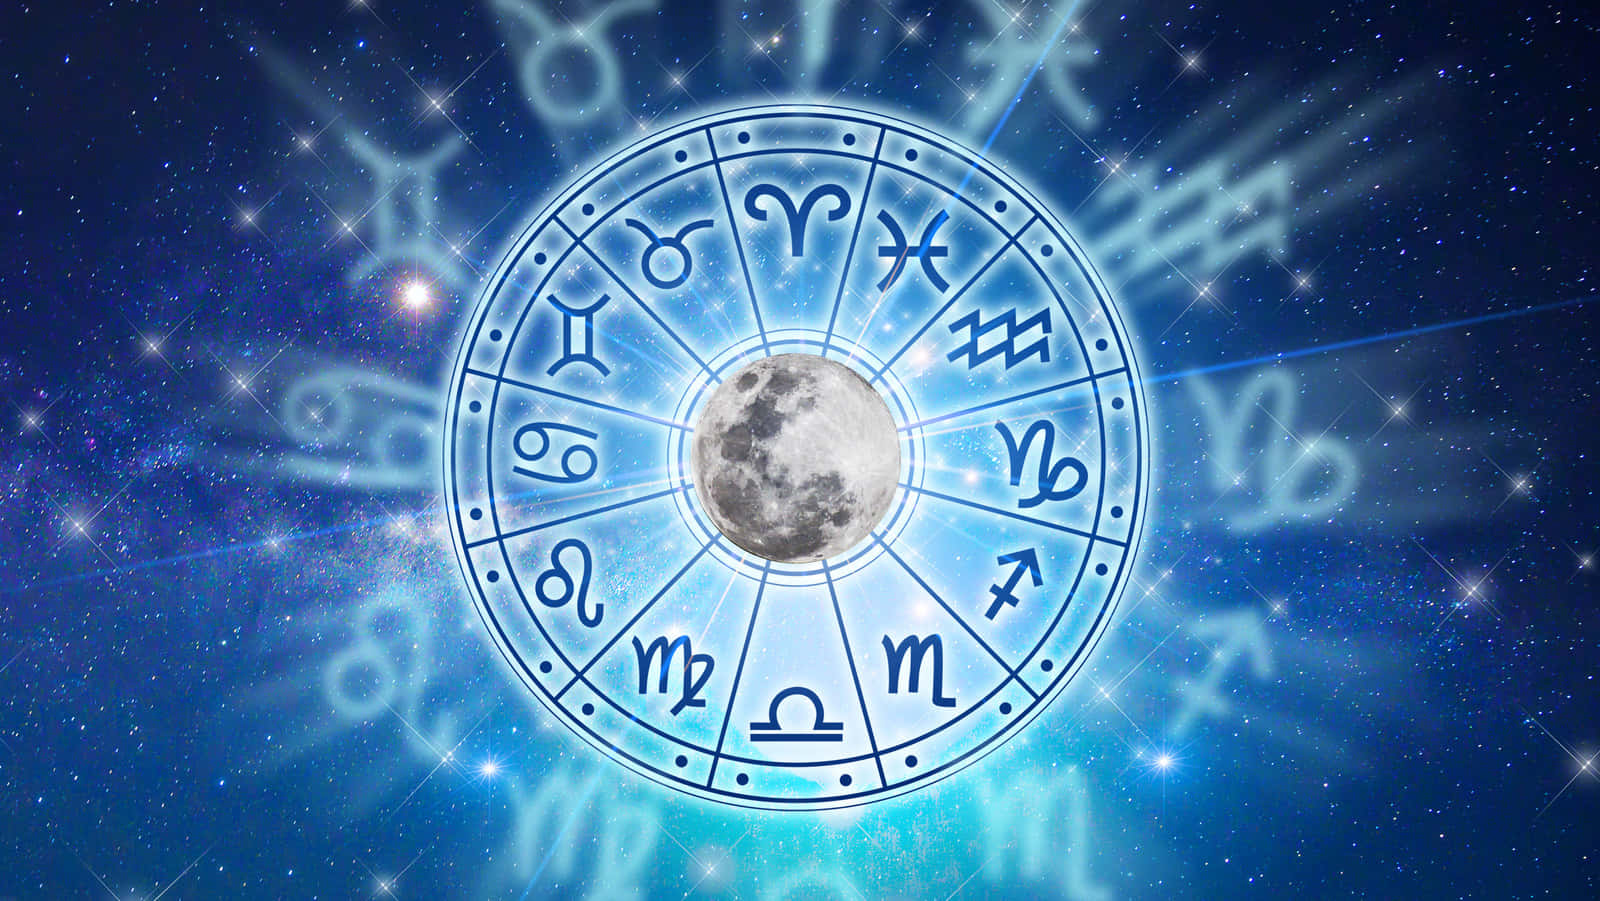 Unlock the secrets of your universe with the powerful wisdom of the Zodiac Signs